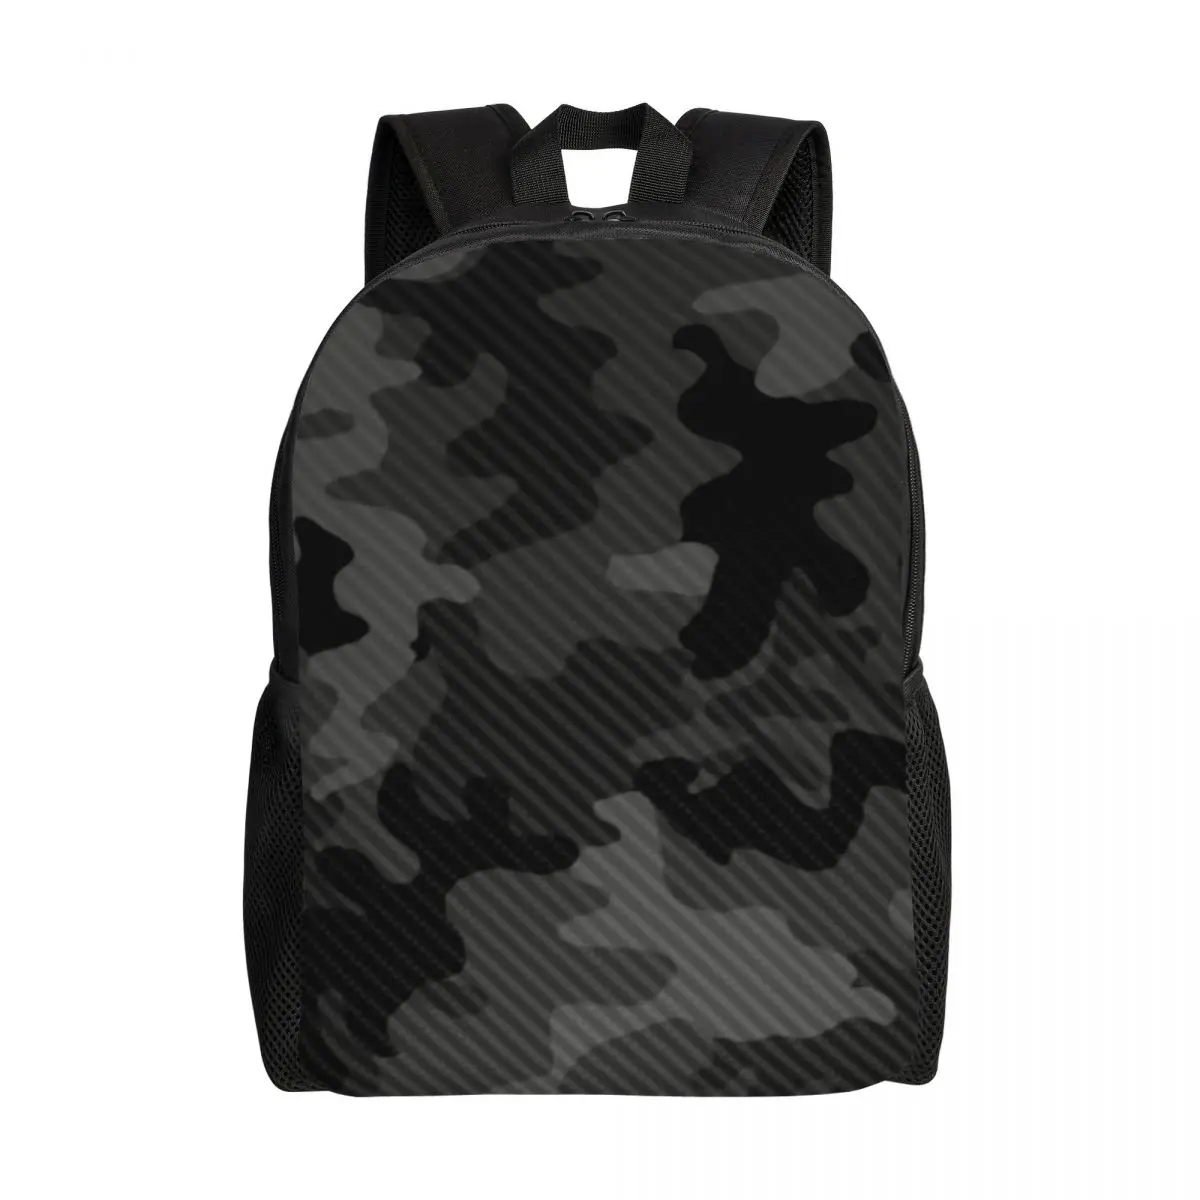 

Carbon Camo Travel Backpack Men Women School Laptop Bookbag Army Military Camouflage College Student Daypack Bags